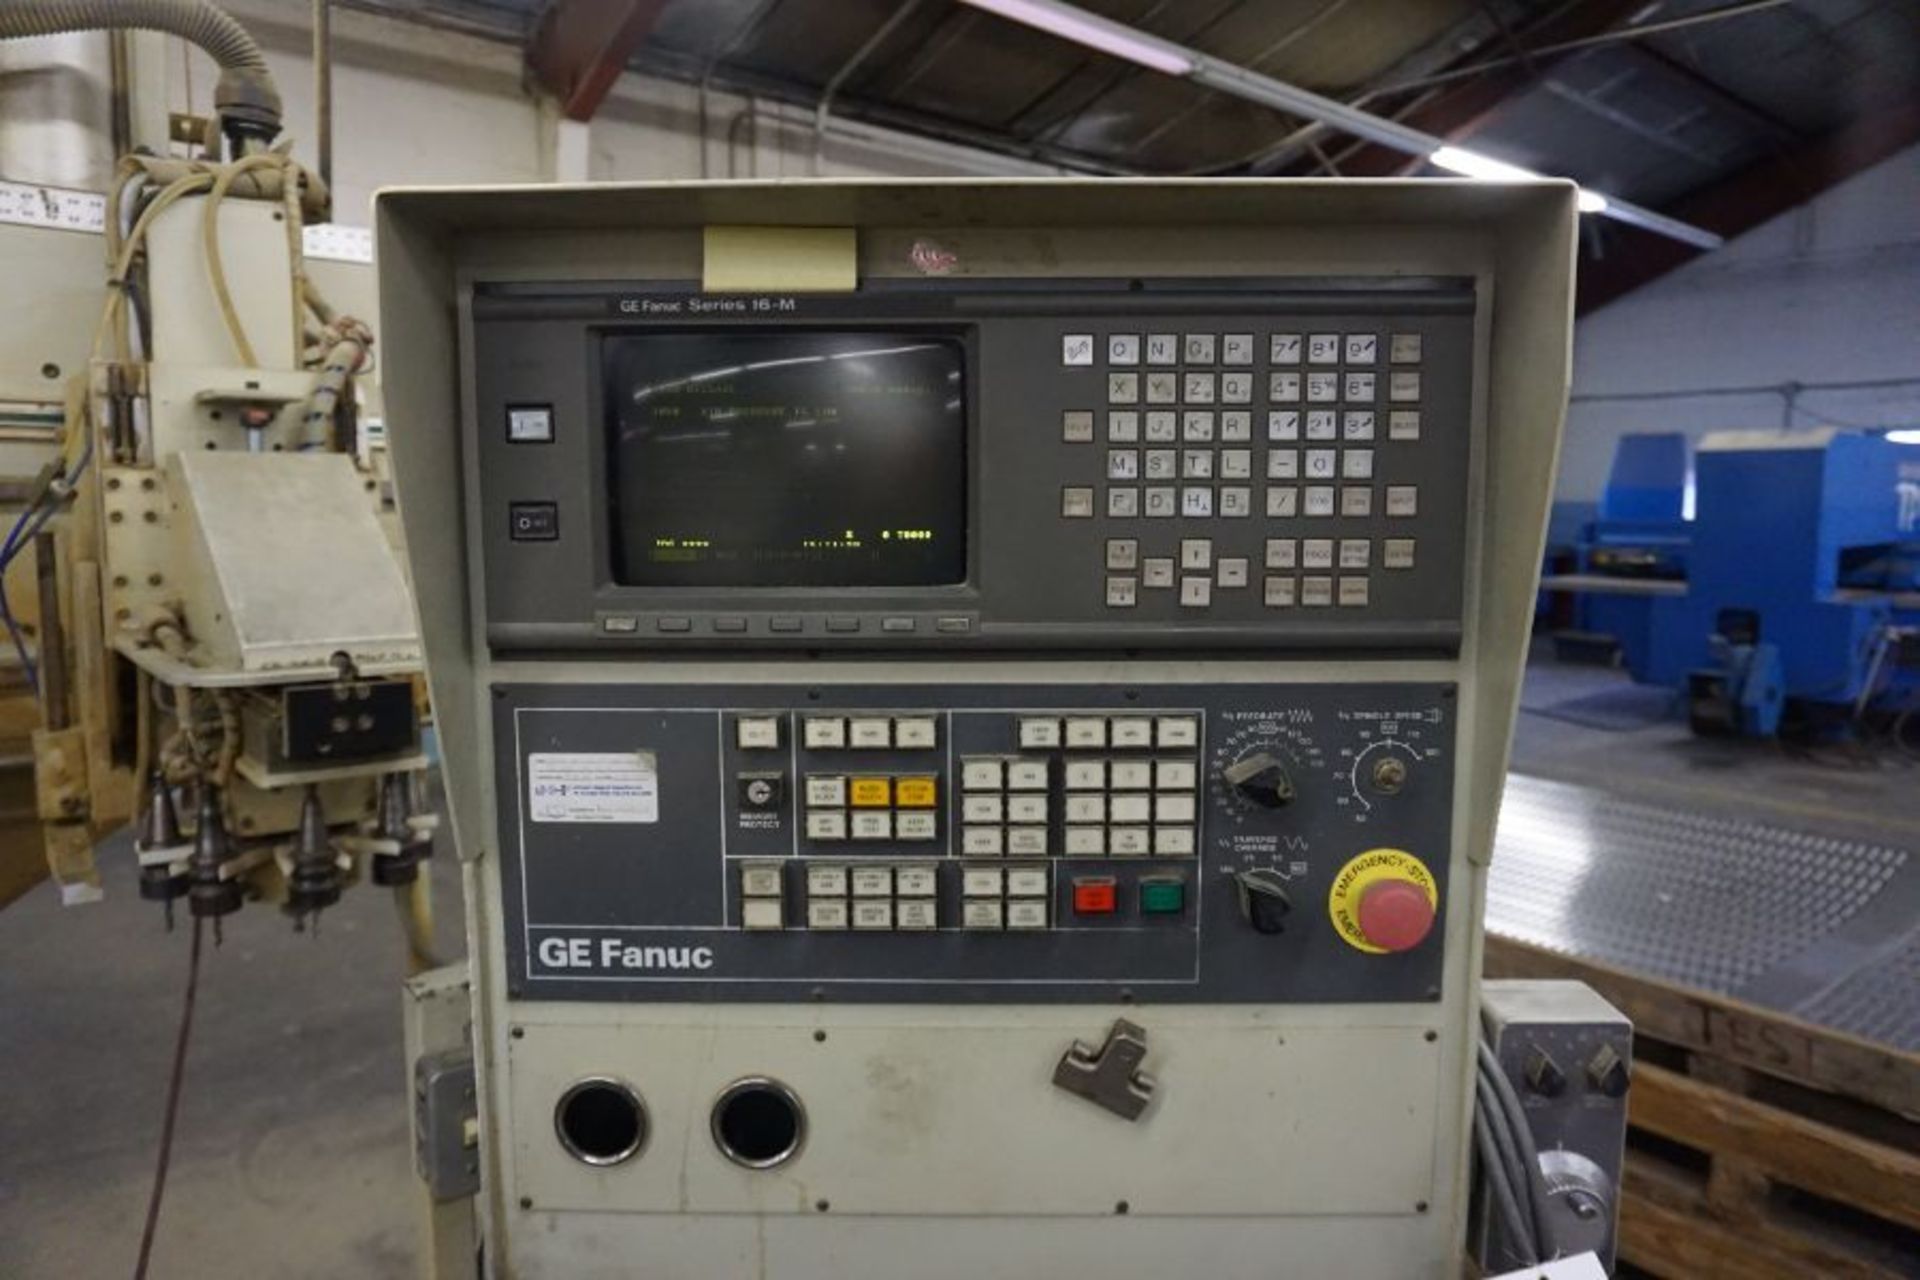 1997 Komo VR1008TT CNC Router, Fanuc 16M Control, Dual 5 x 10' Tabels,*Auctioned from Edgerton, KS* - Image 10 of 12